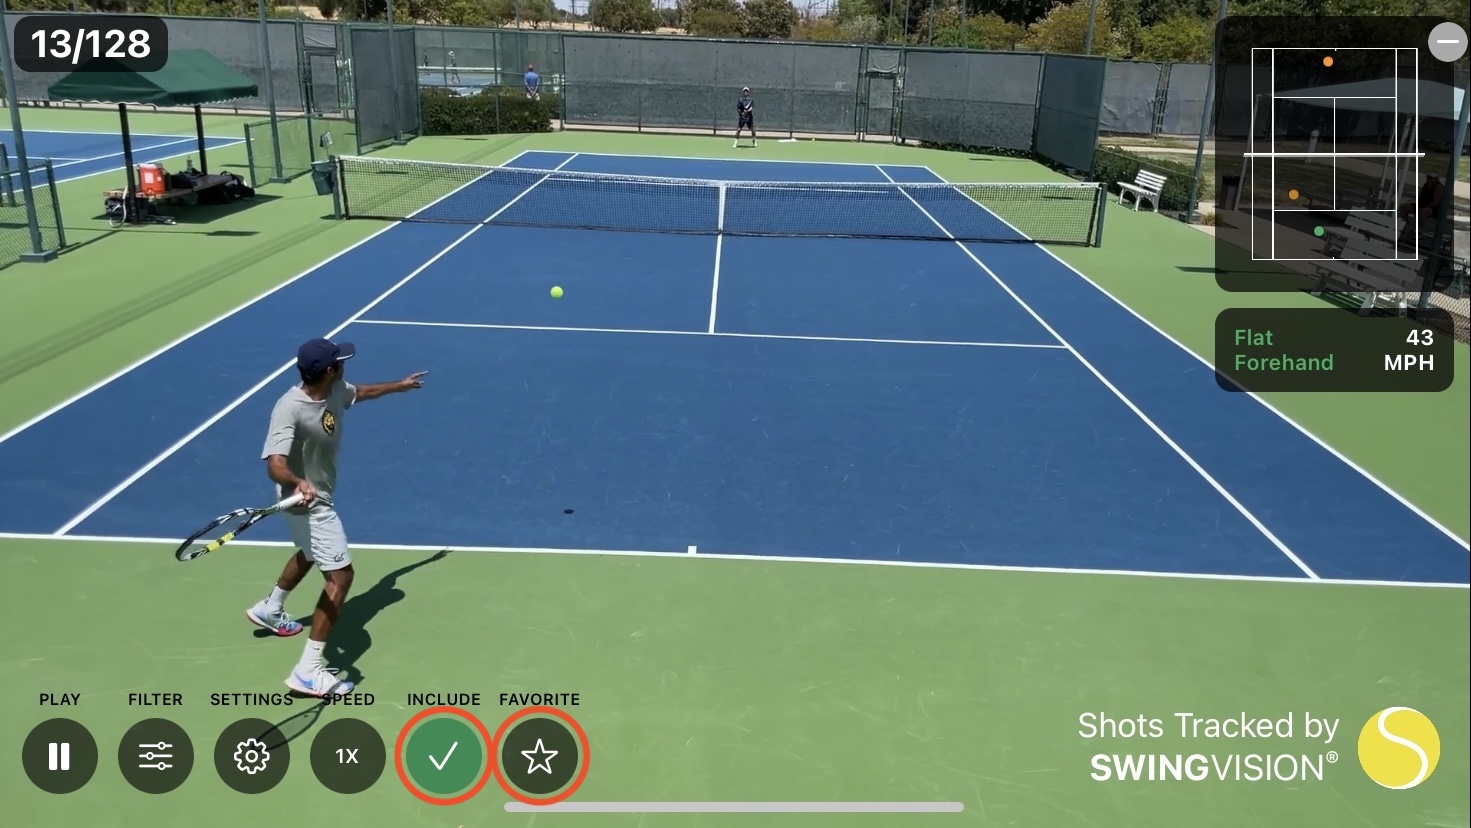 SwingVision: A.I. Scoring, Stats & Line Calling for Tennis